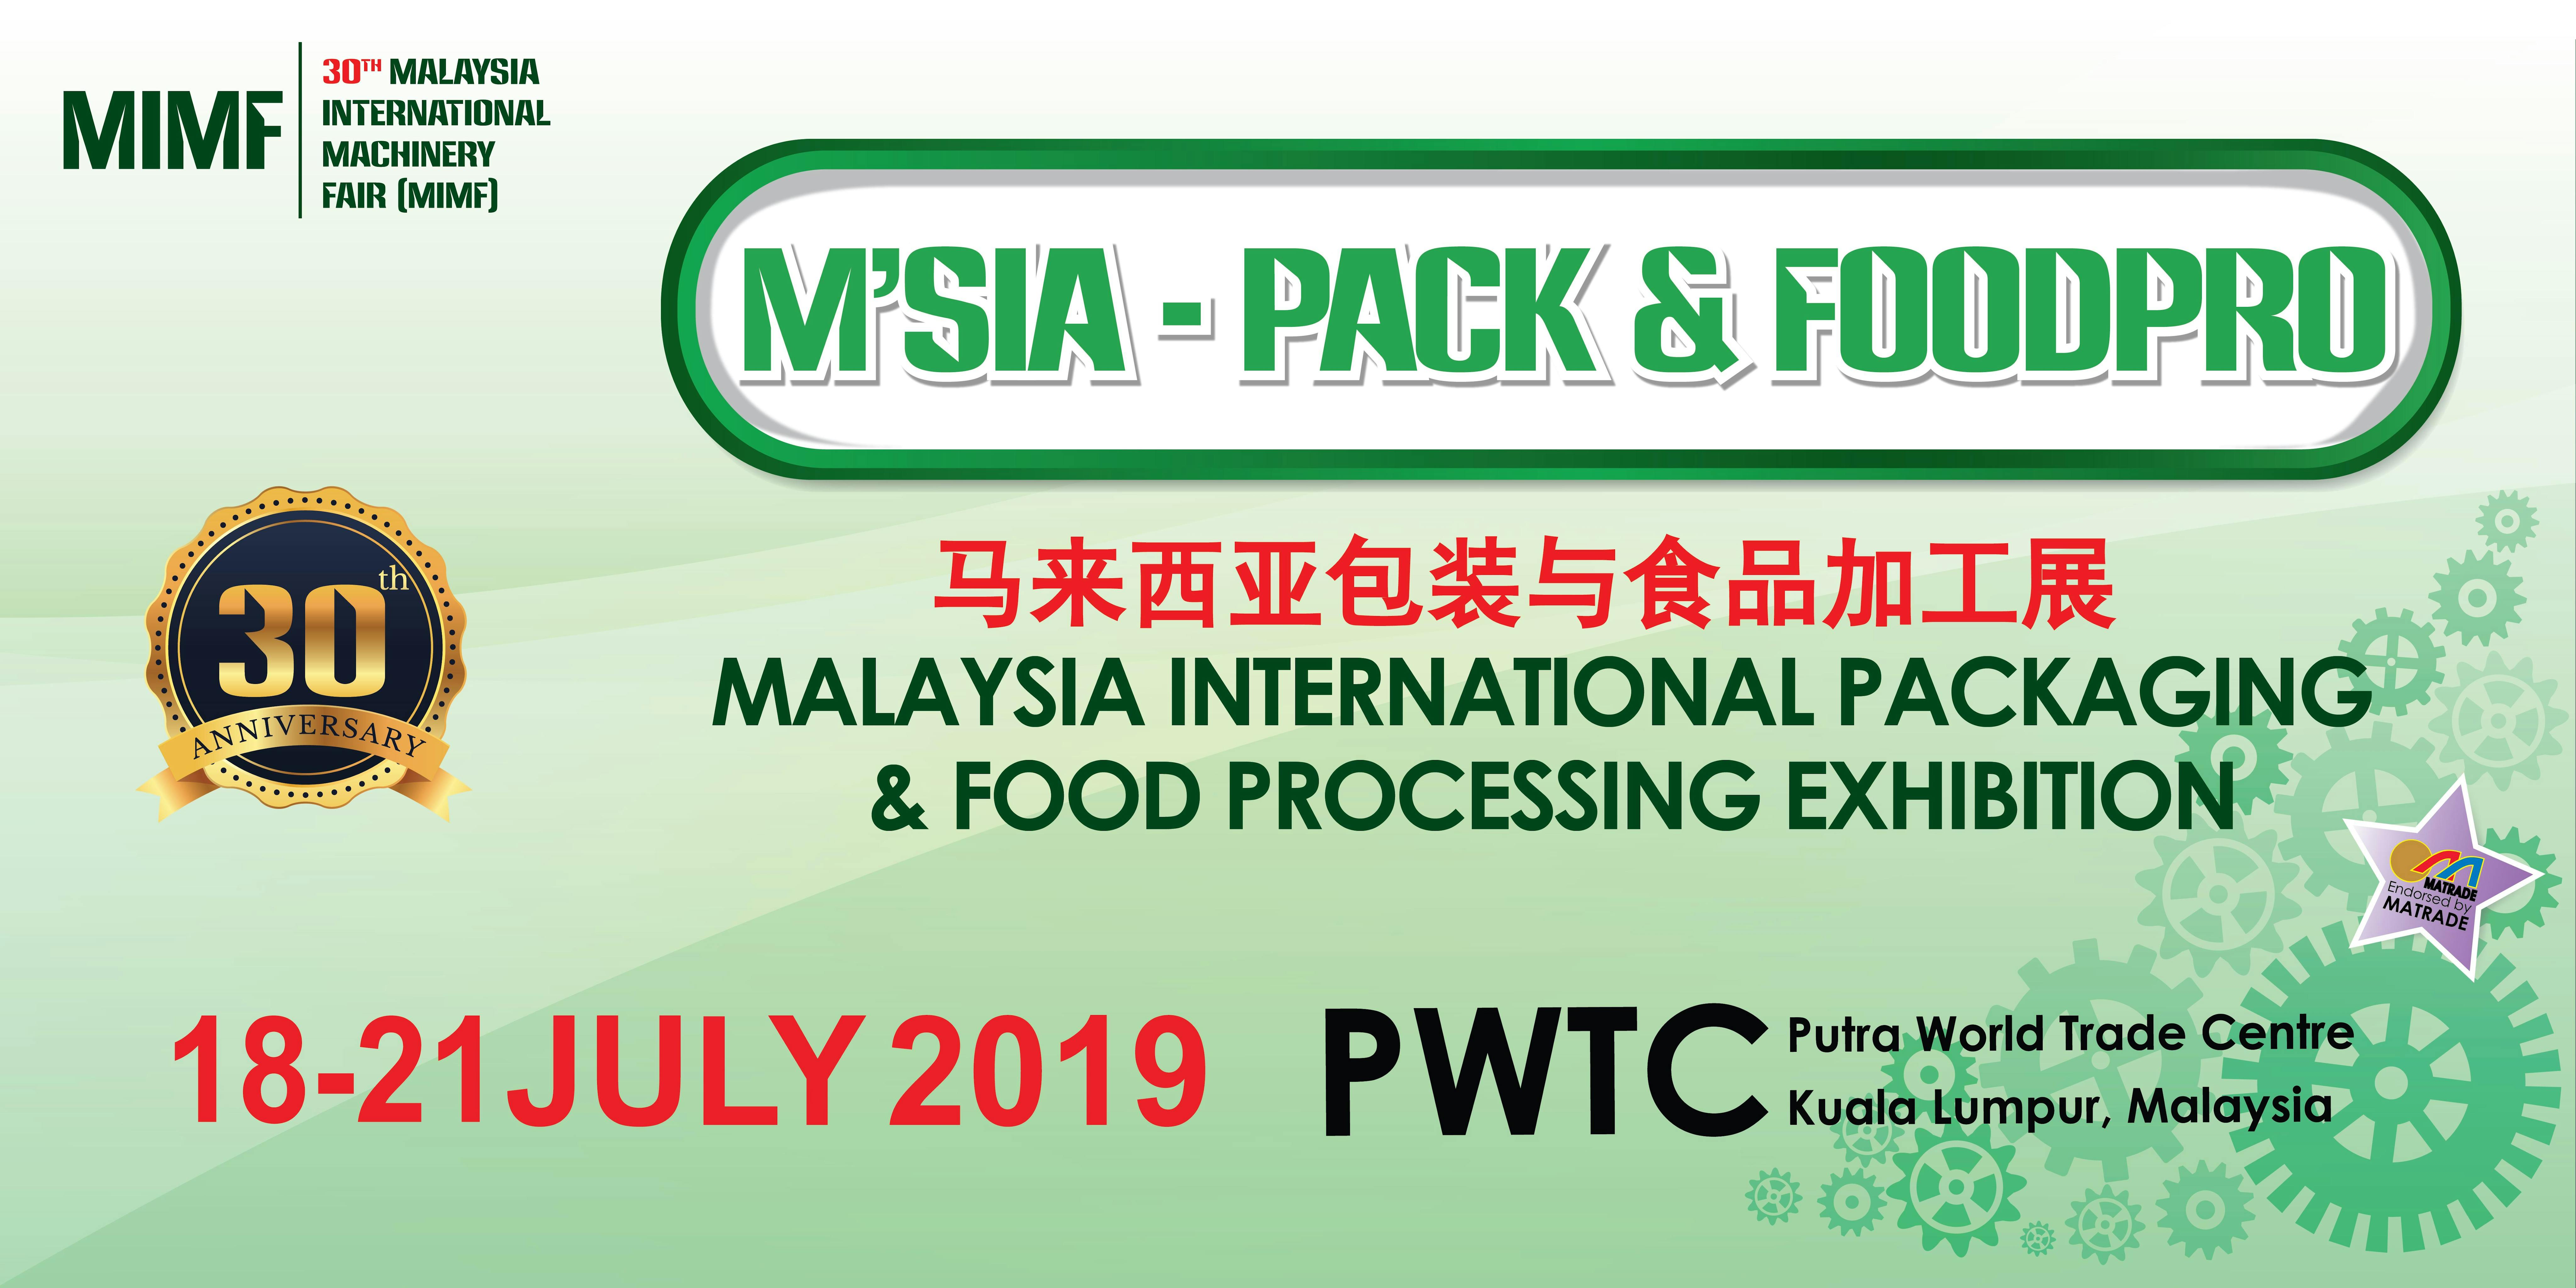 MALAYSIA INTERNATIONAL PACKAGING & FOOD PROCESSING EXHIBITION